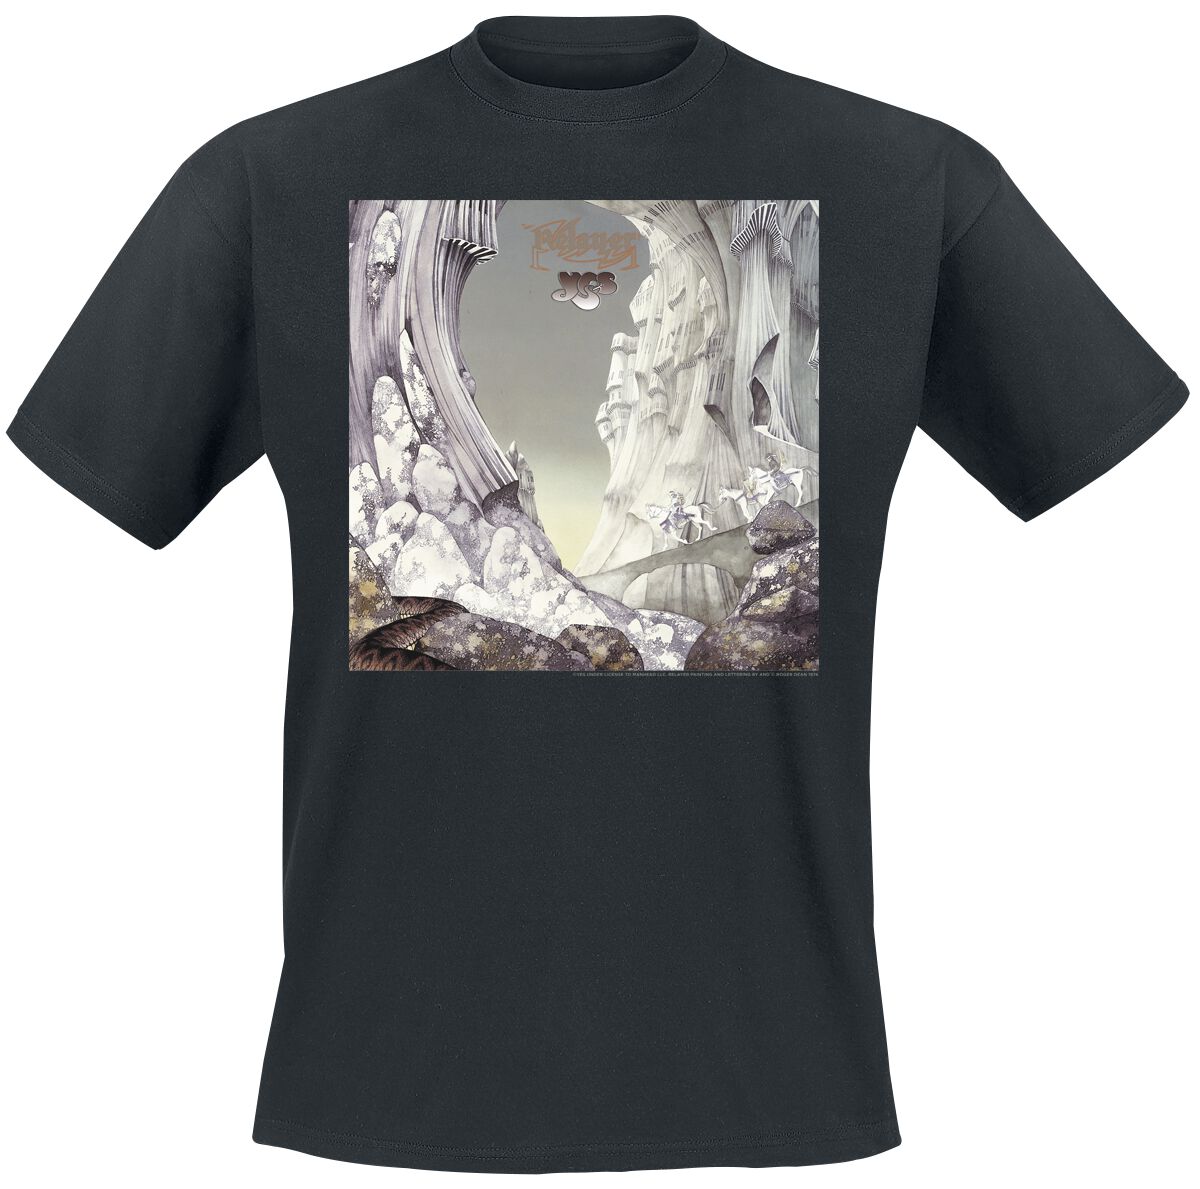 Image of Yes Relayer Album Cover T-Shirt schwarz